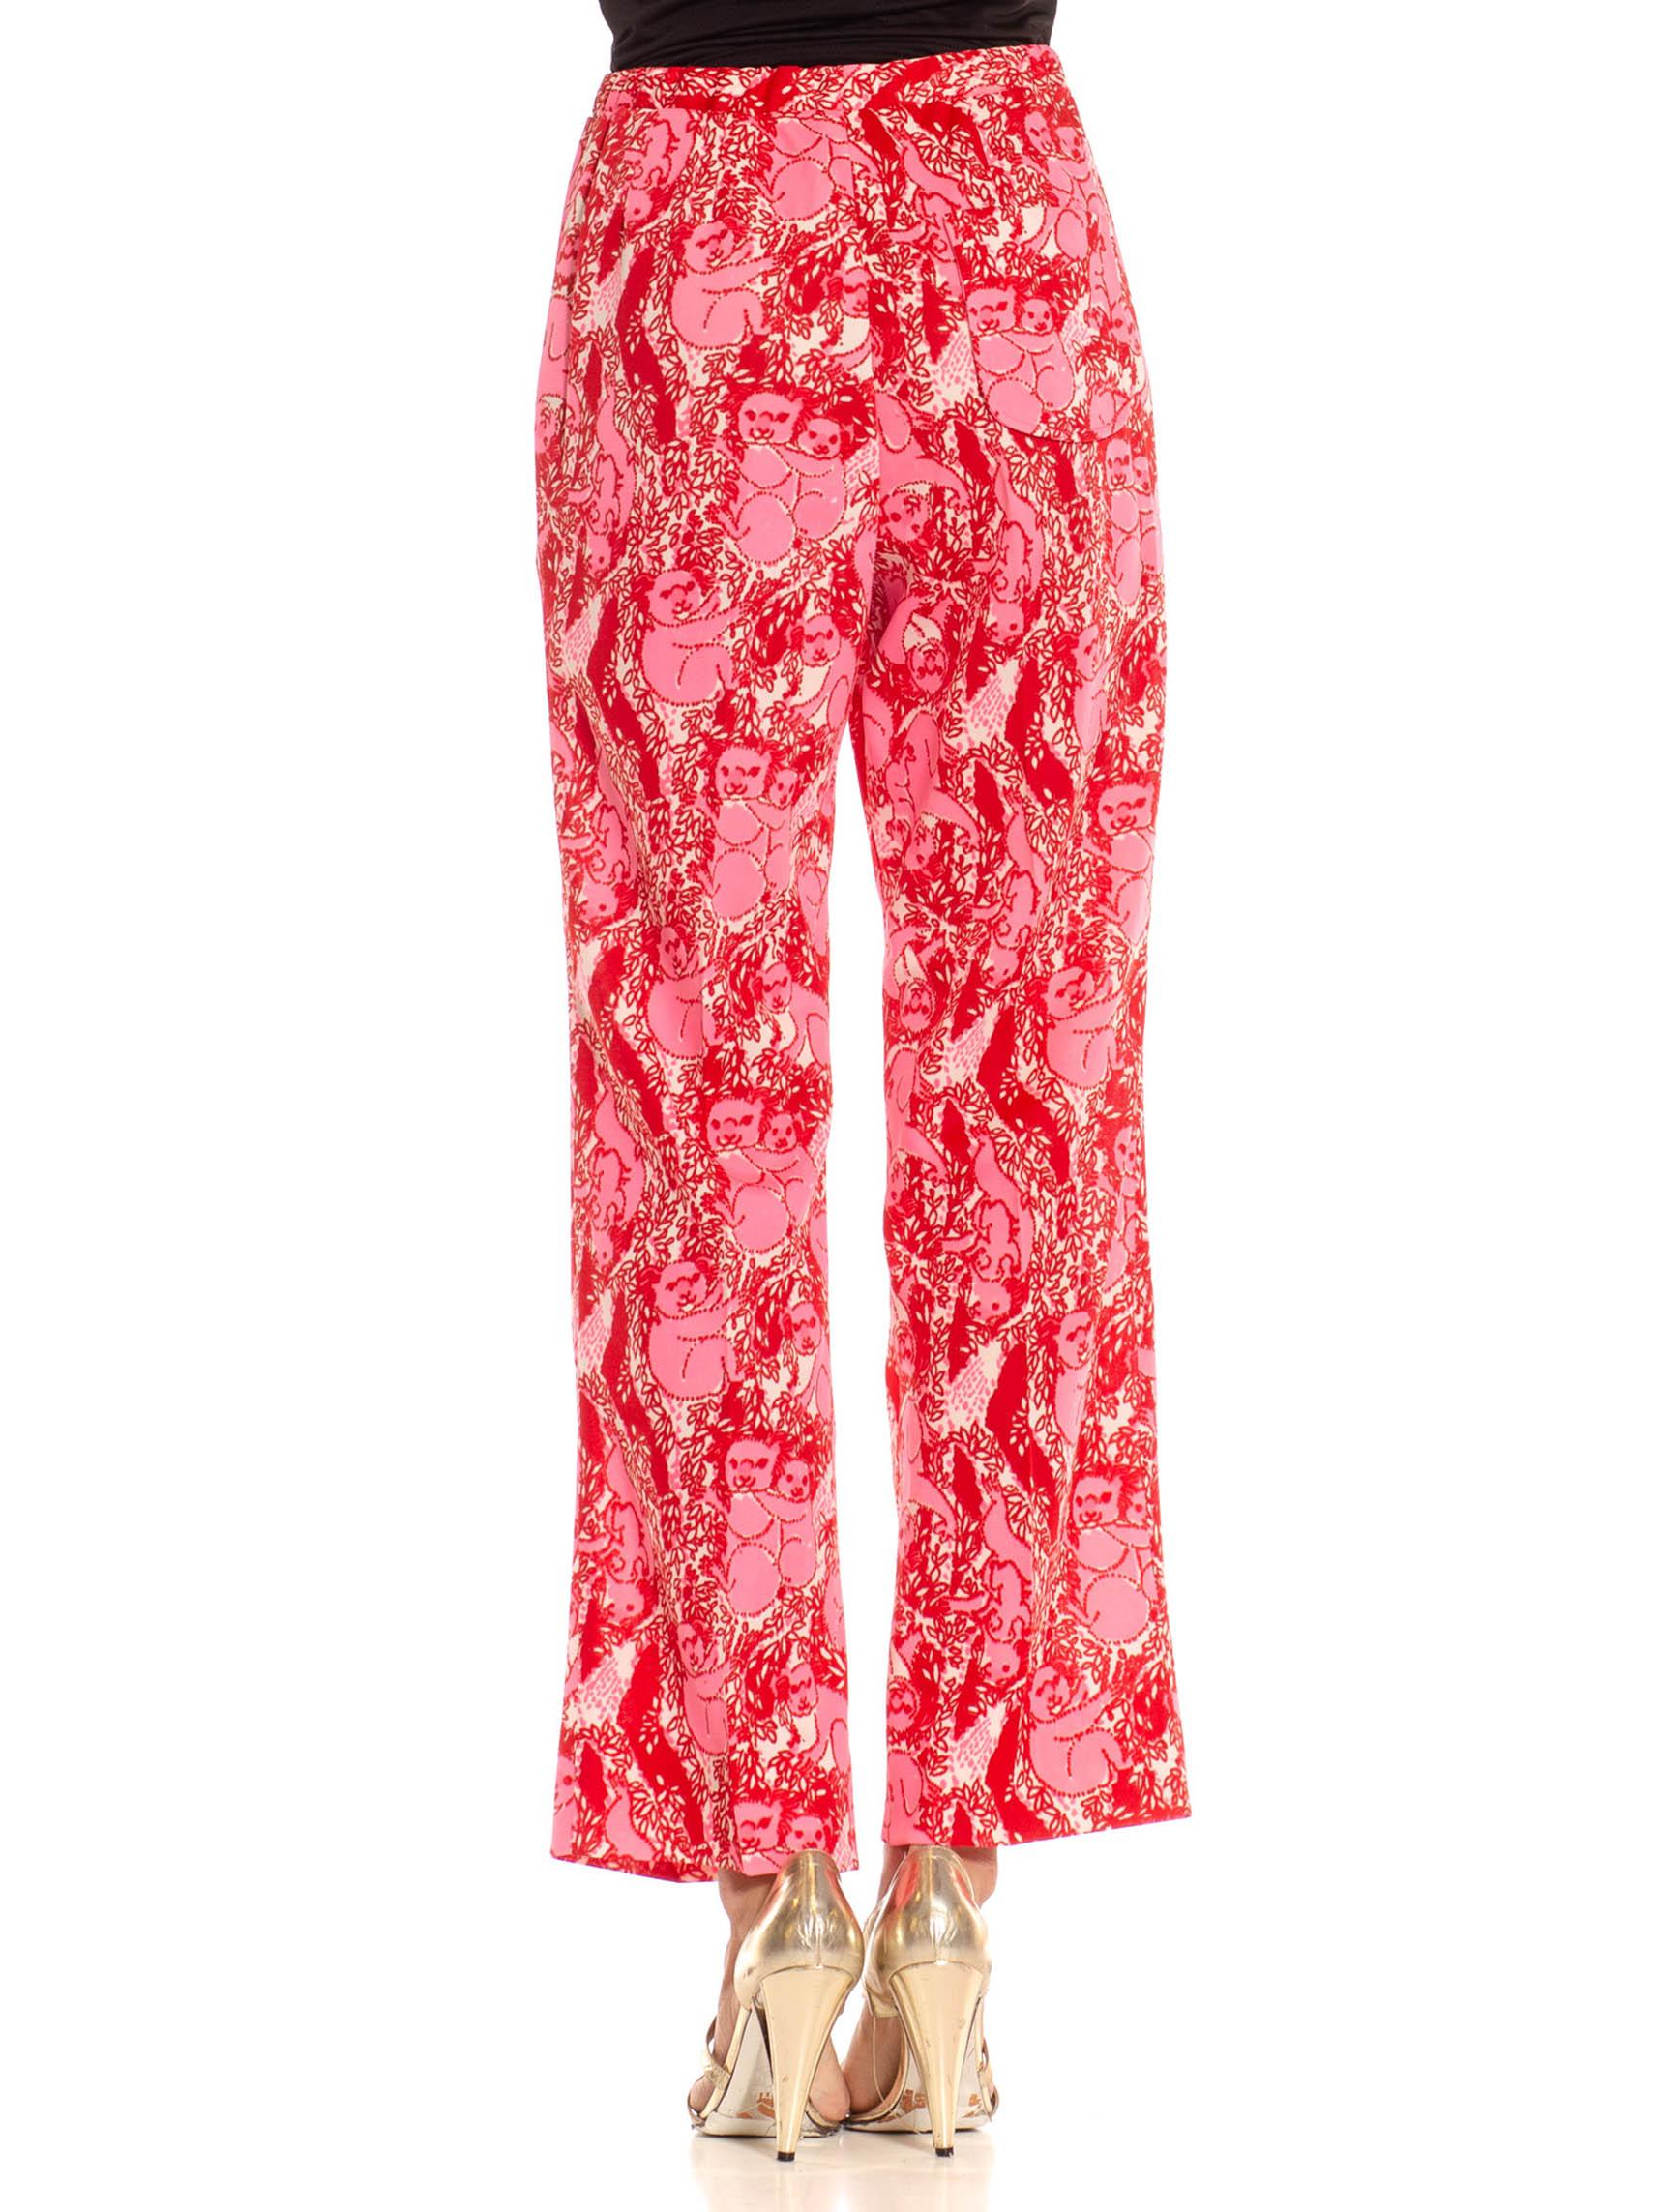 1970S Lilly Pulitzer Pink & Red Polyester Stretch Koala Print Pants 5